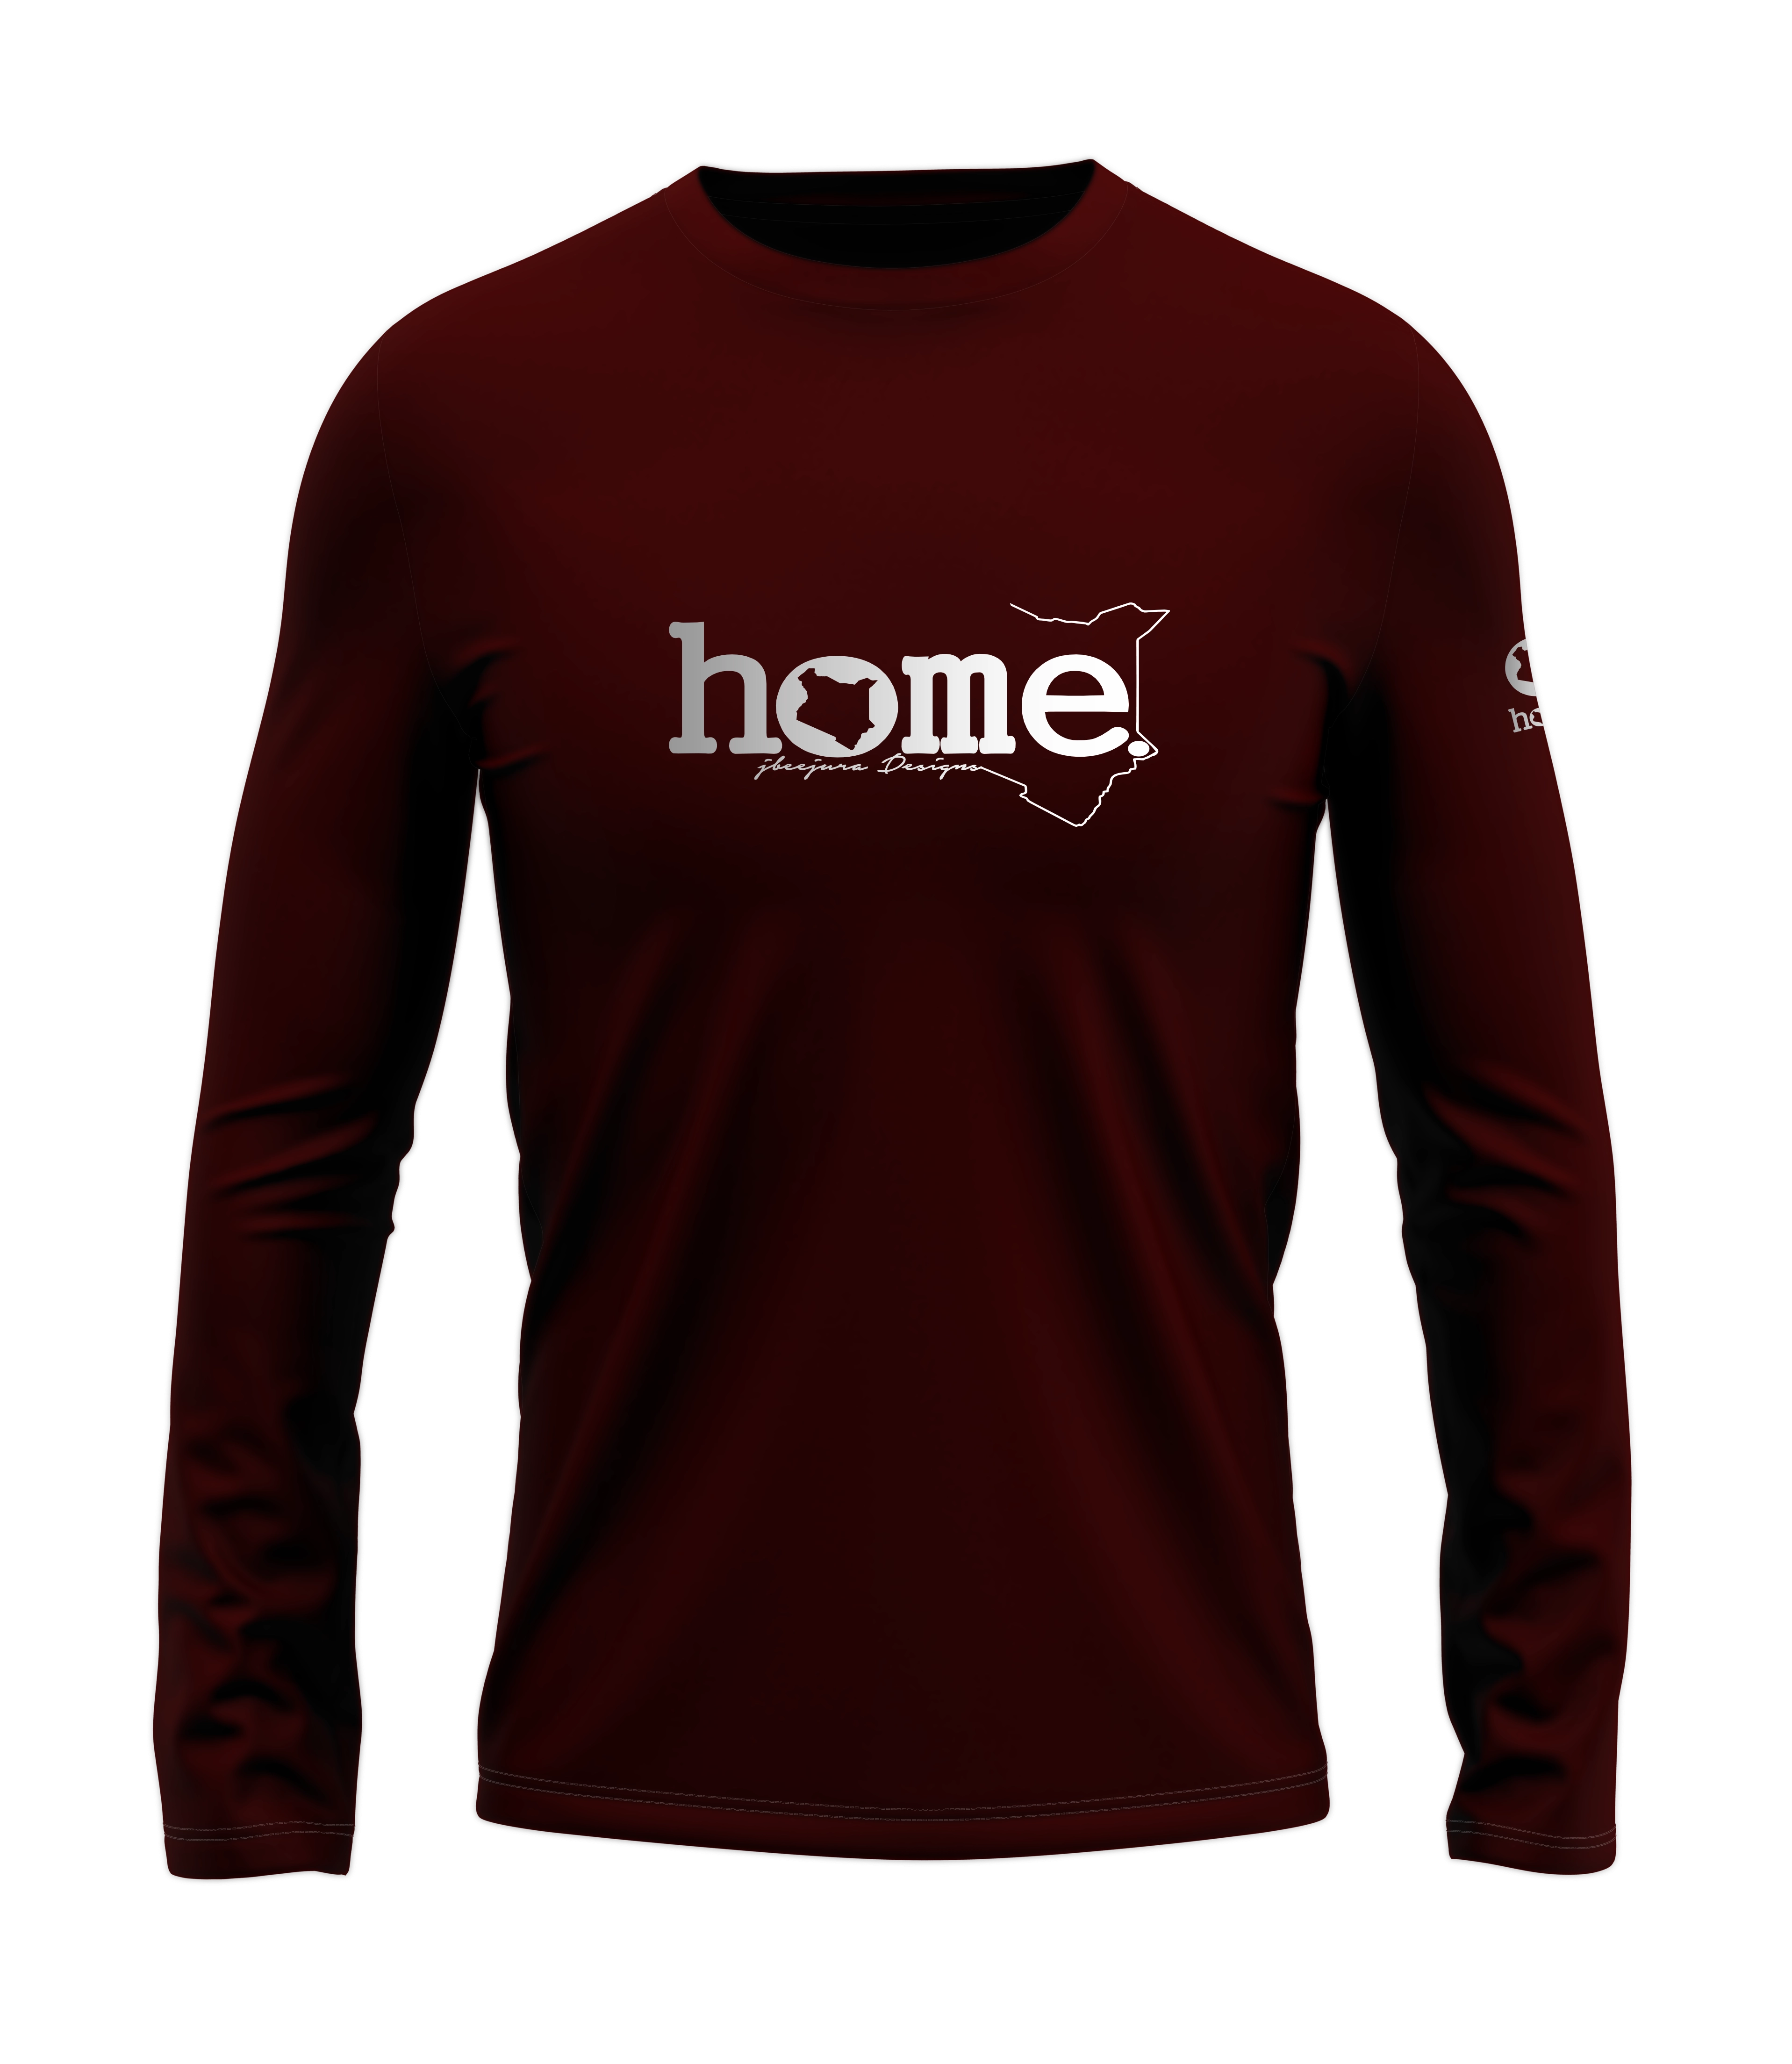 home_254 LONG-SLEEVED MAROON T-SHIRT WITH A SILVER CLASSIC WORDS PRINT – COTTON PLUS FABRIC